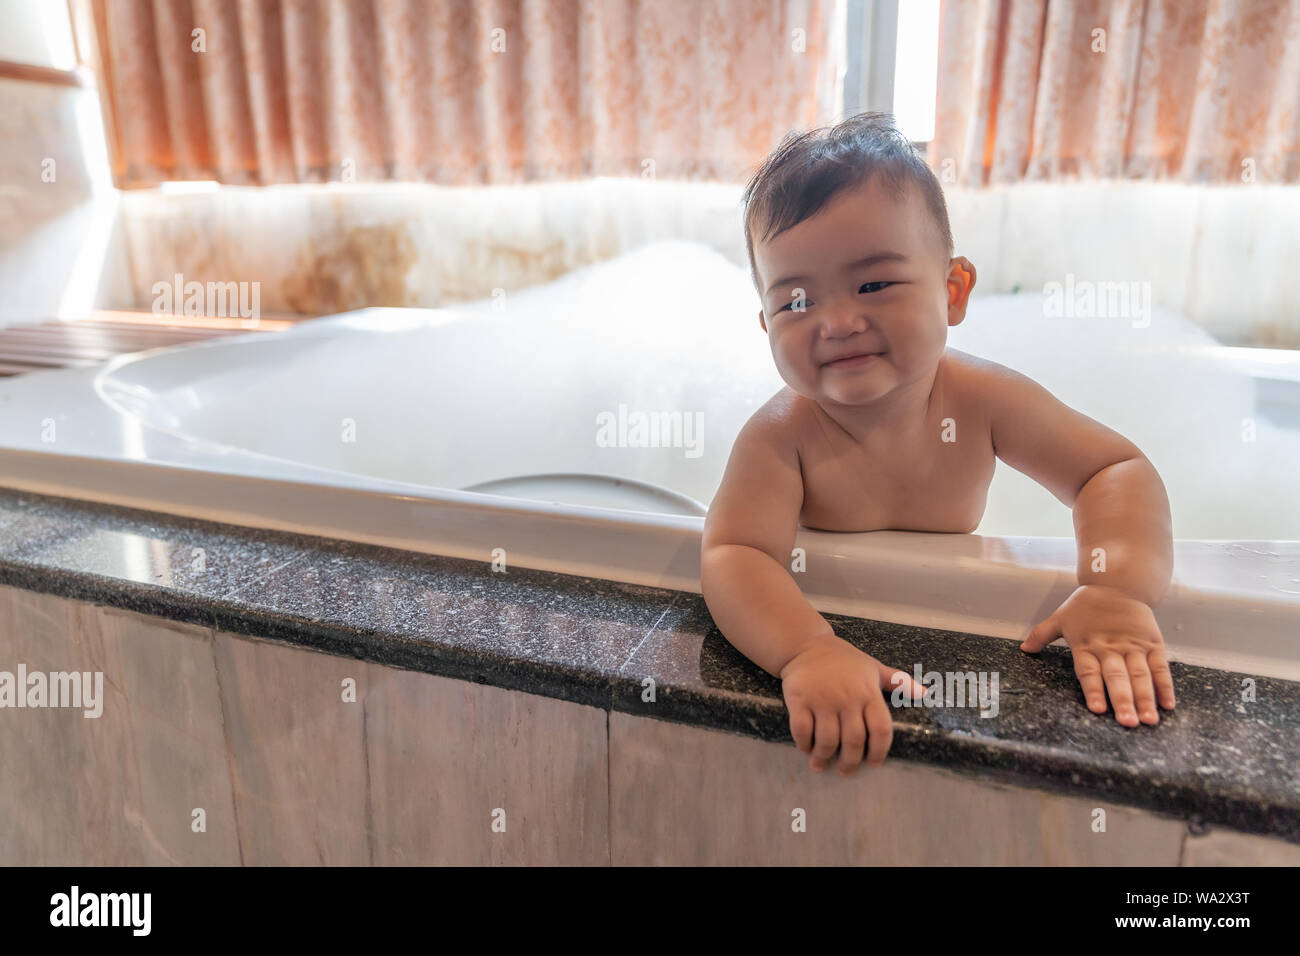 Asian happy laughing baby boy taking a bath playing with foam bubbles. Little child in a bathtub. Smiling kid in bathroom with sunlight window backgro Stock Photo